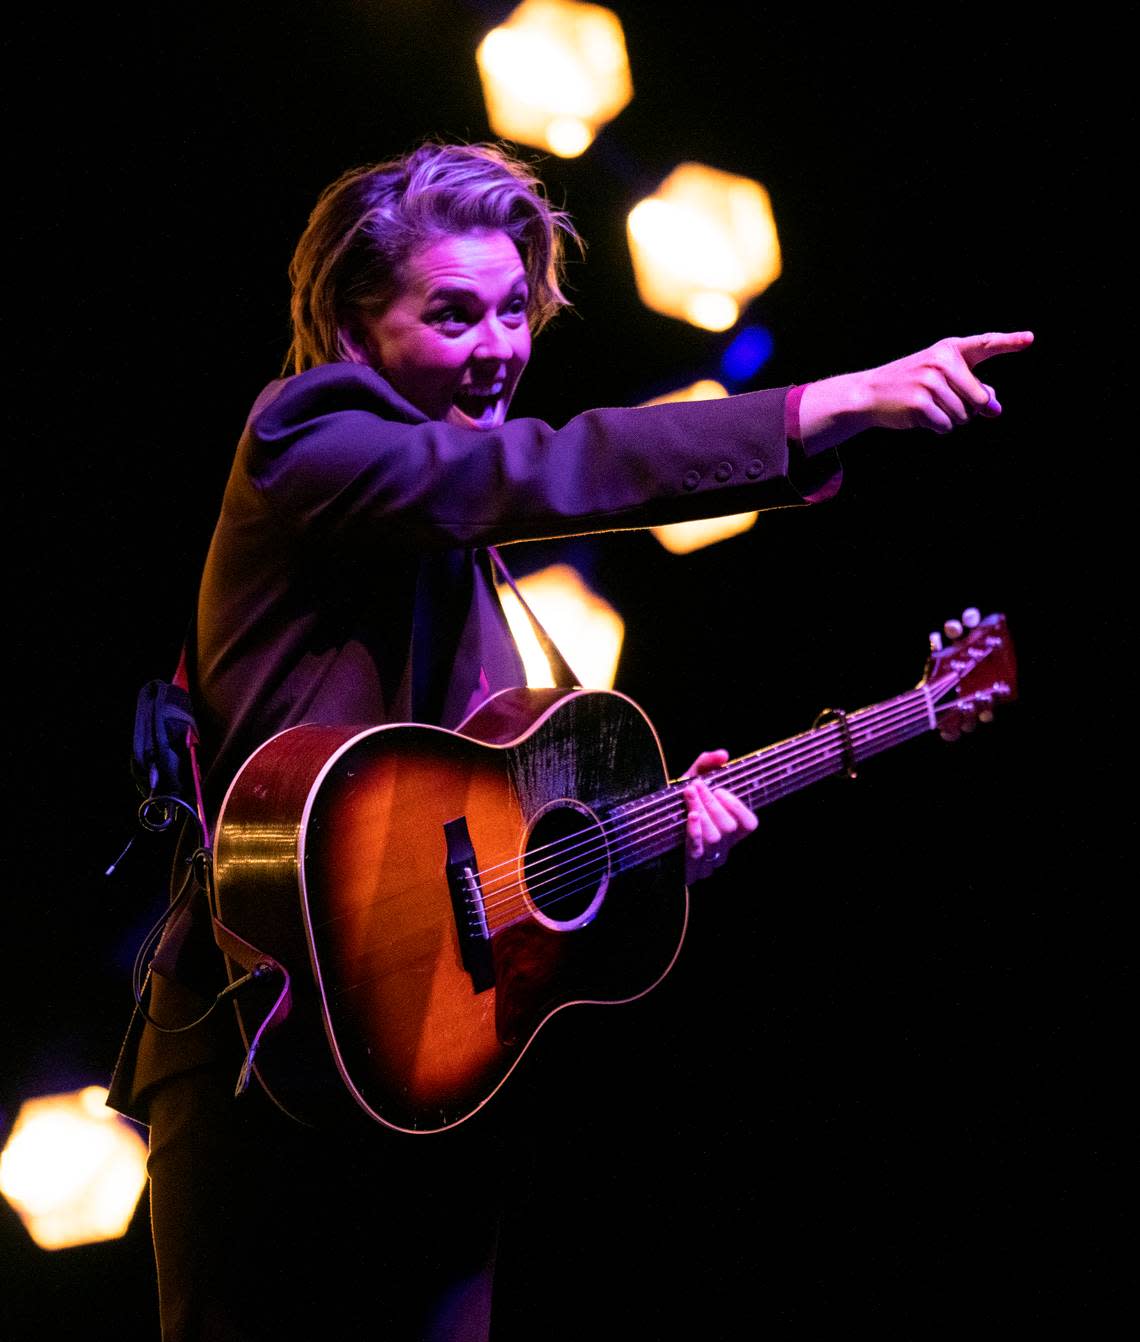 Brandi Carlile acknowledges the crowd as she takes the stage for a special solo concert at DPAC in Durham, N.C., Friday night, Oct. 7, 2022.